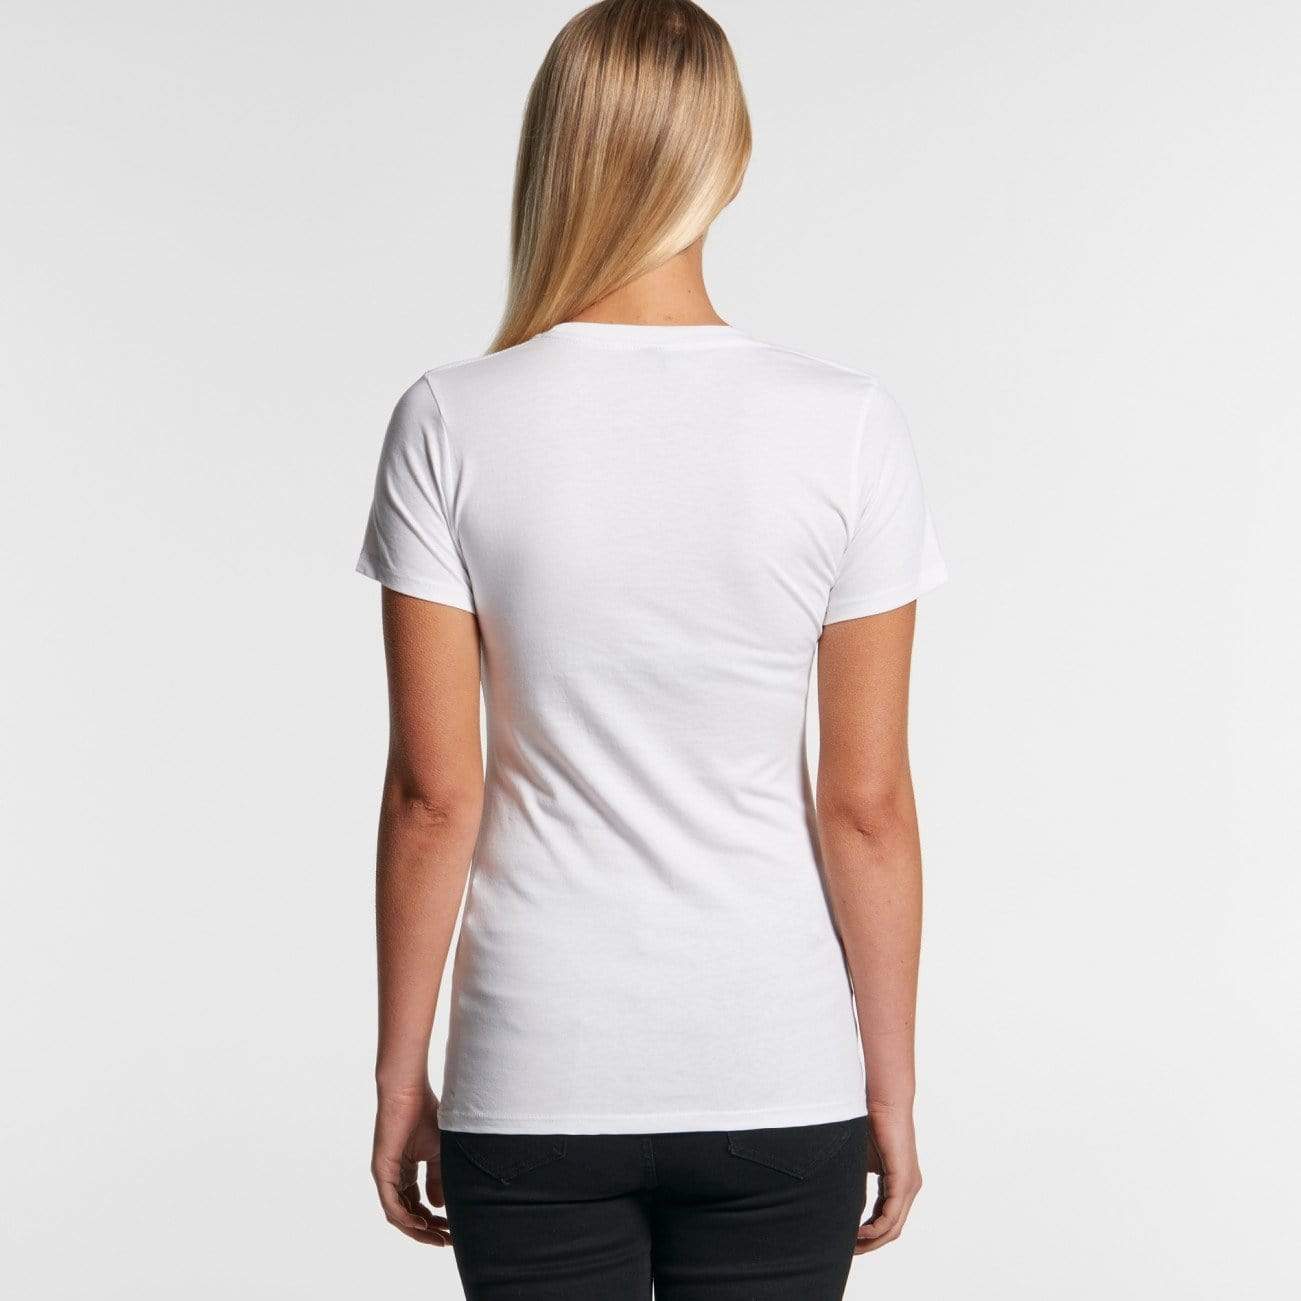 Printed As Colour Women's Wafer tee 4002 Casual Wear As Colour   